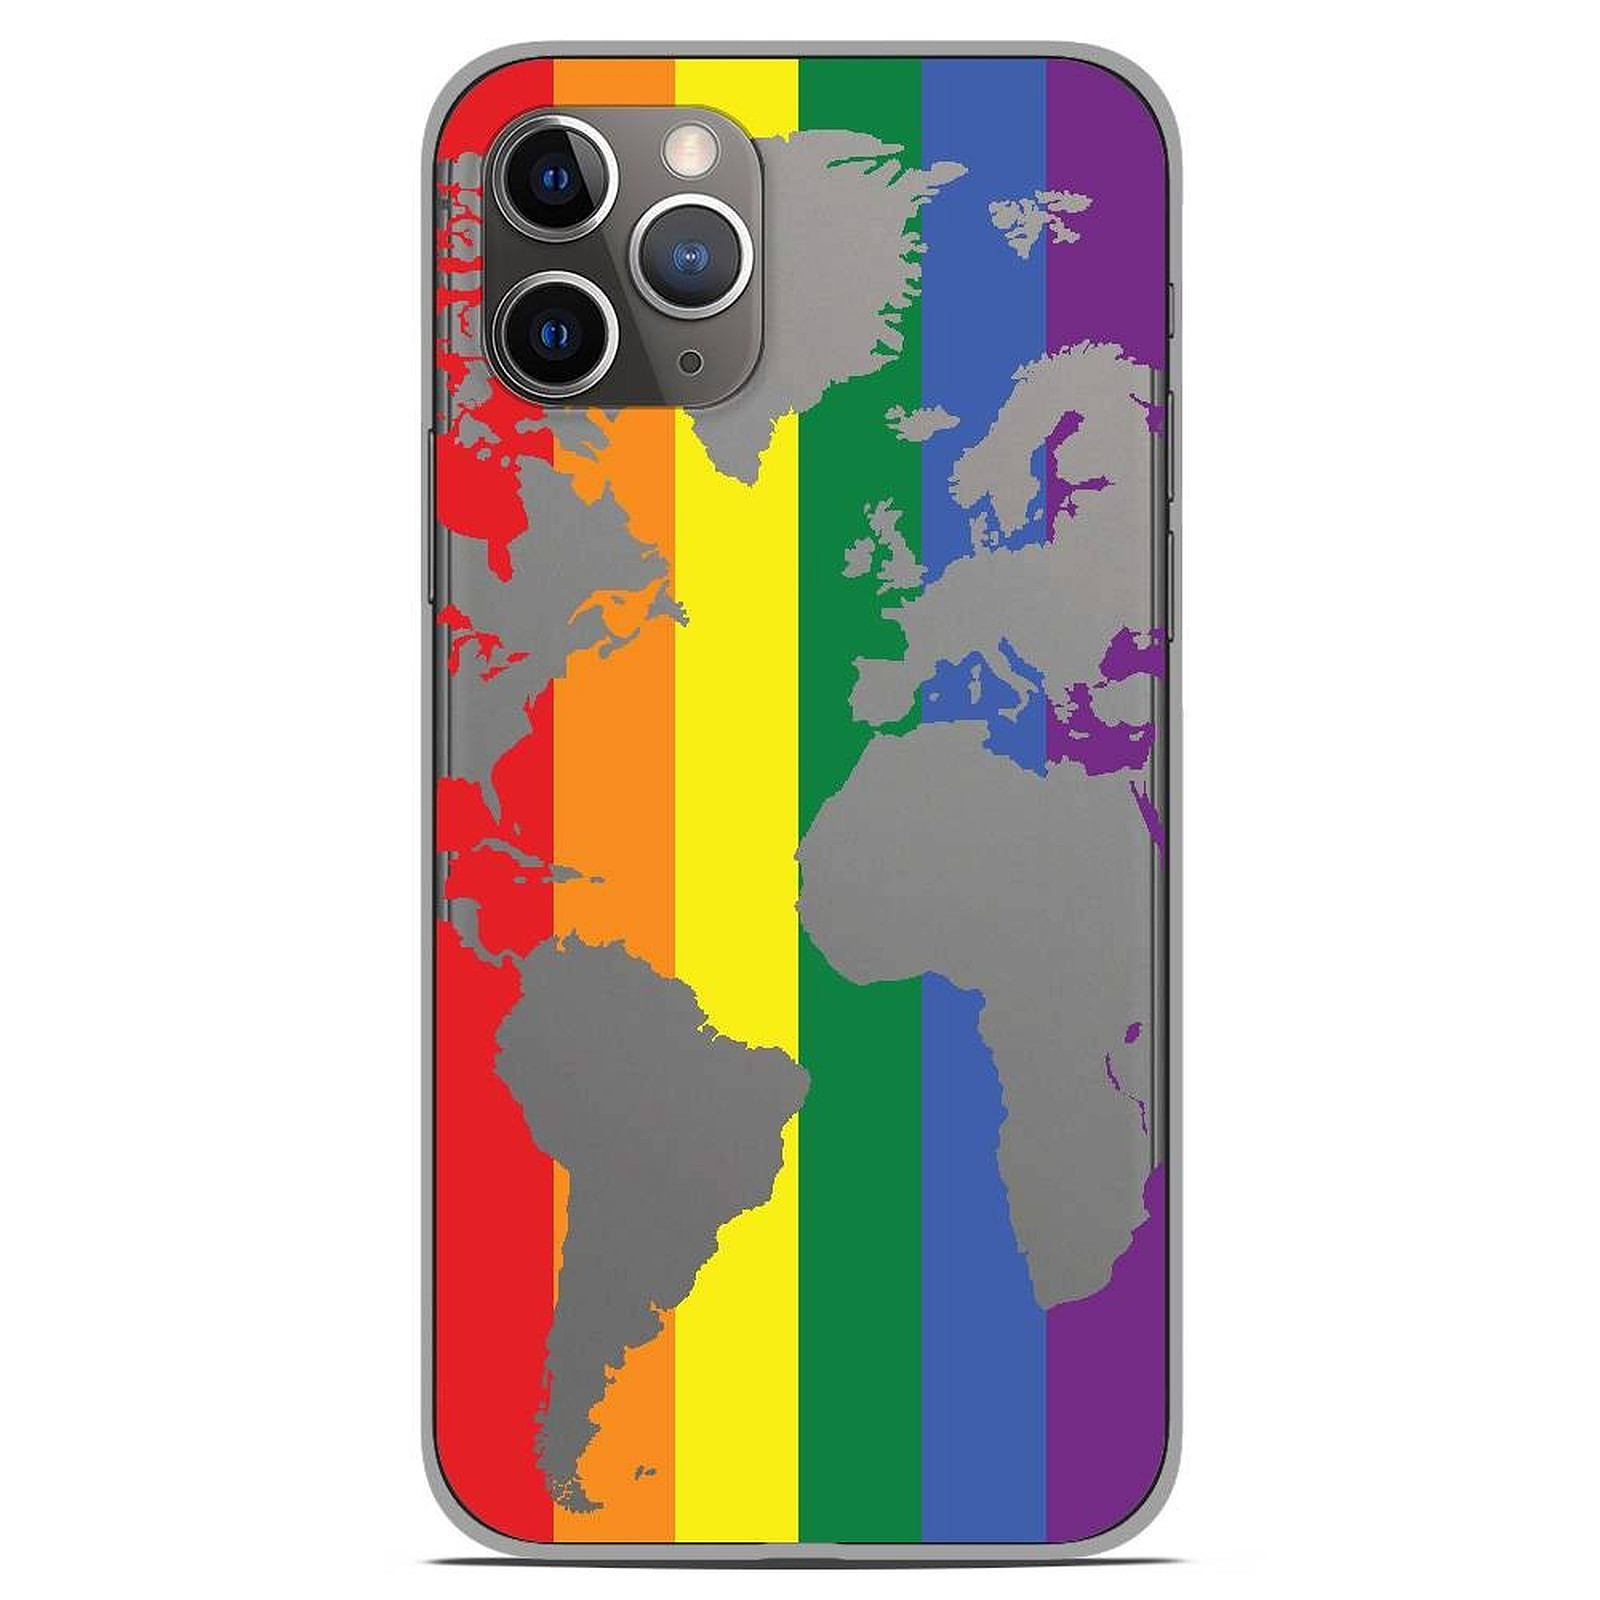 1001 Coques Coque silicone gel Apple iPhone 11 Pro motif Map LGBT - Coque telephone 1001Coques